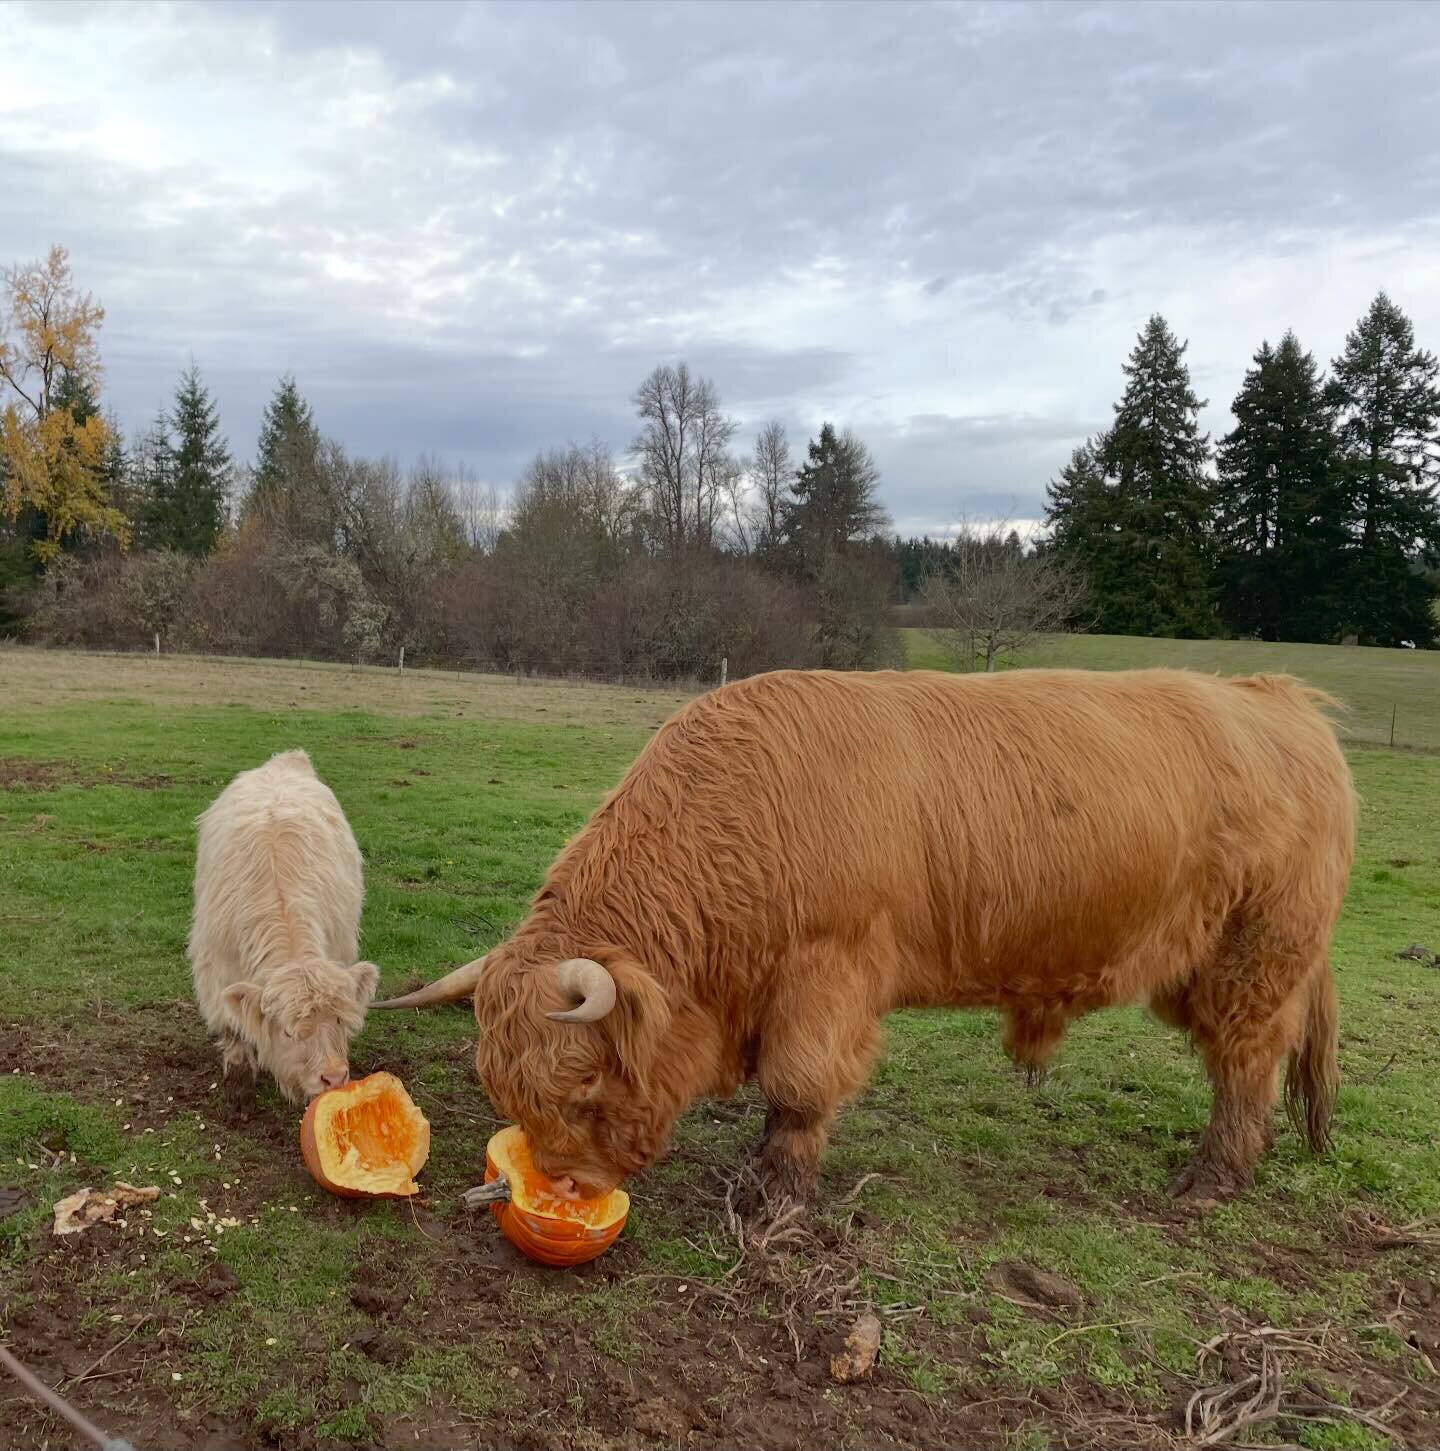 Judgement free post!
If you still have pumpkins, come recycle them here! Our cows, goats, and chickens love them! 

There&rsquo;s a map of the farm on the front porch of the farm store so you&rsquo;ll know where to go. 

We are open from noon-6pm eve